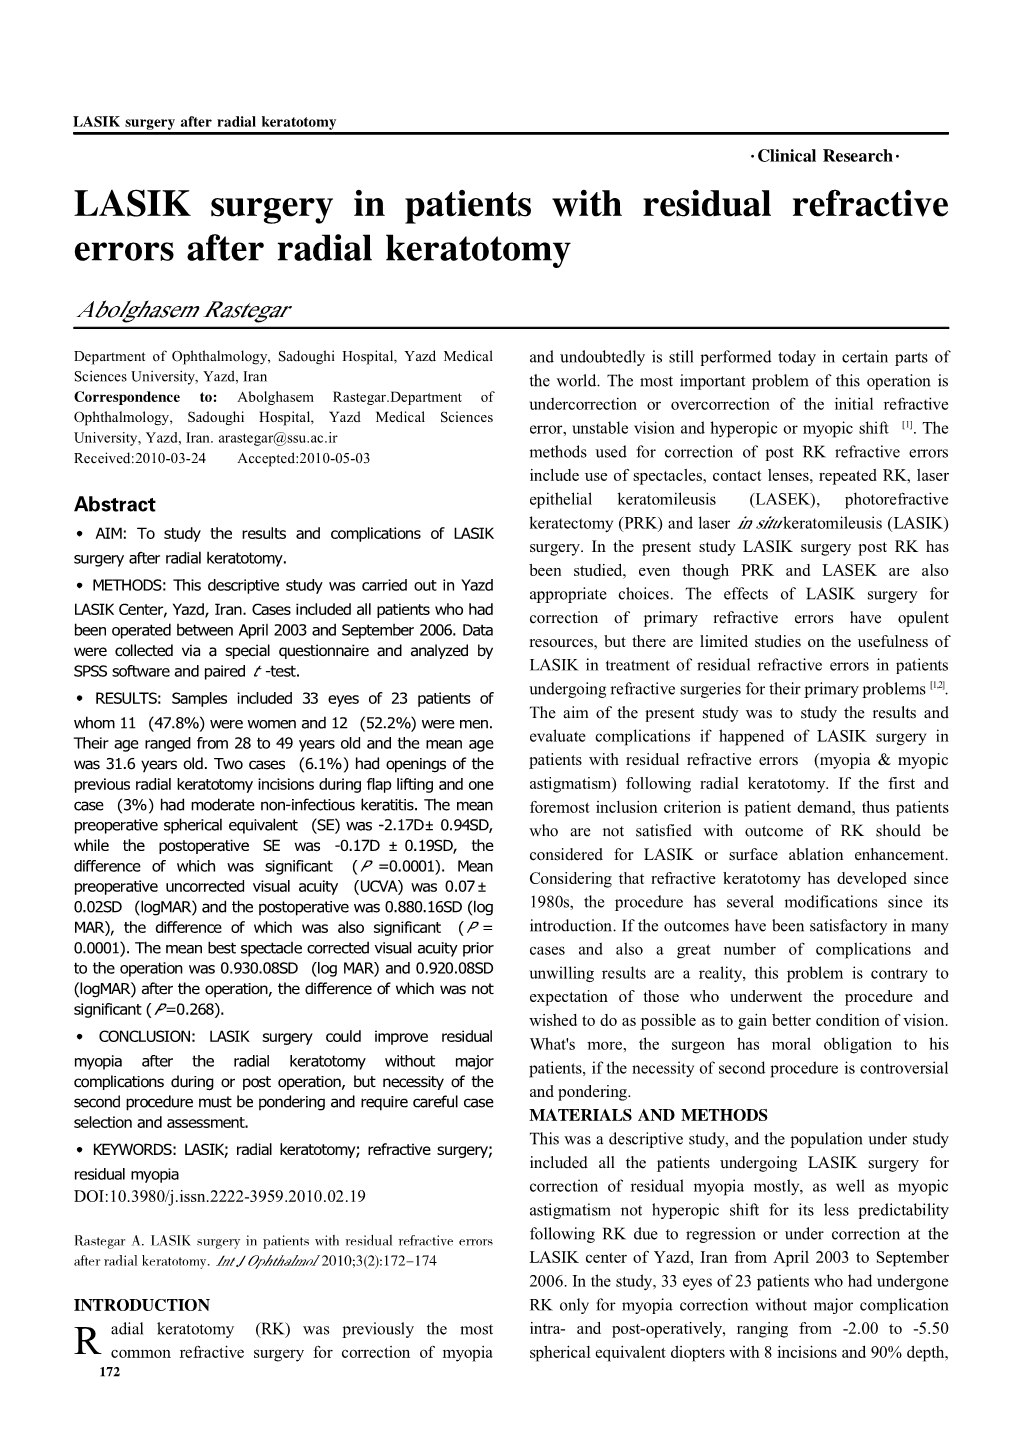 LASIK Surgery in Patients with Residual Refractive Errors After Radial